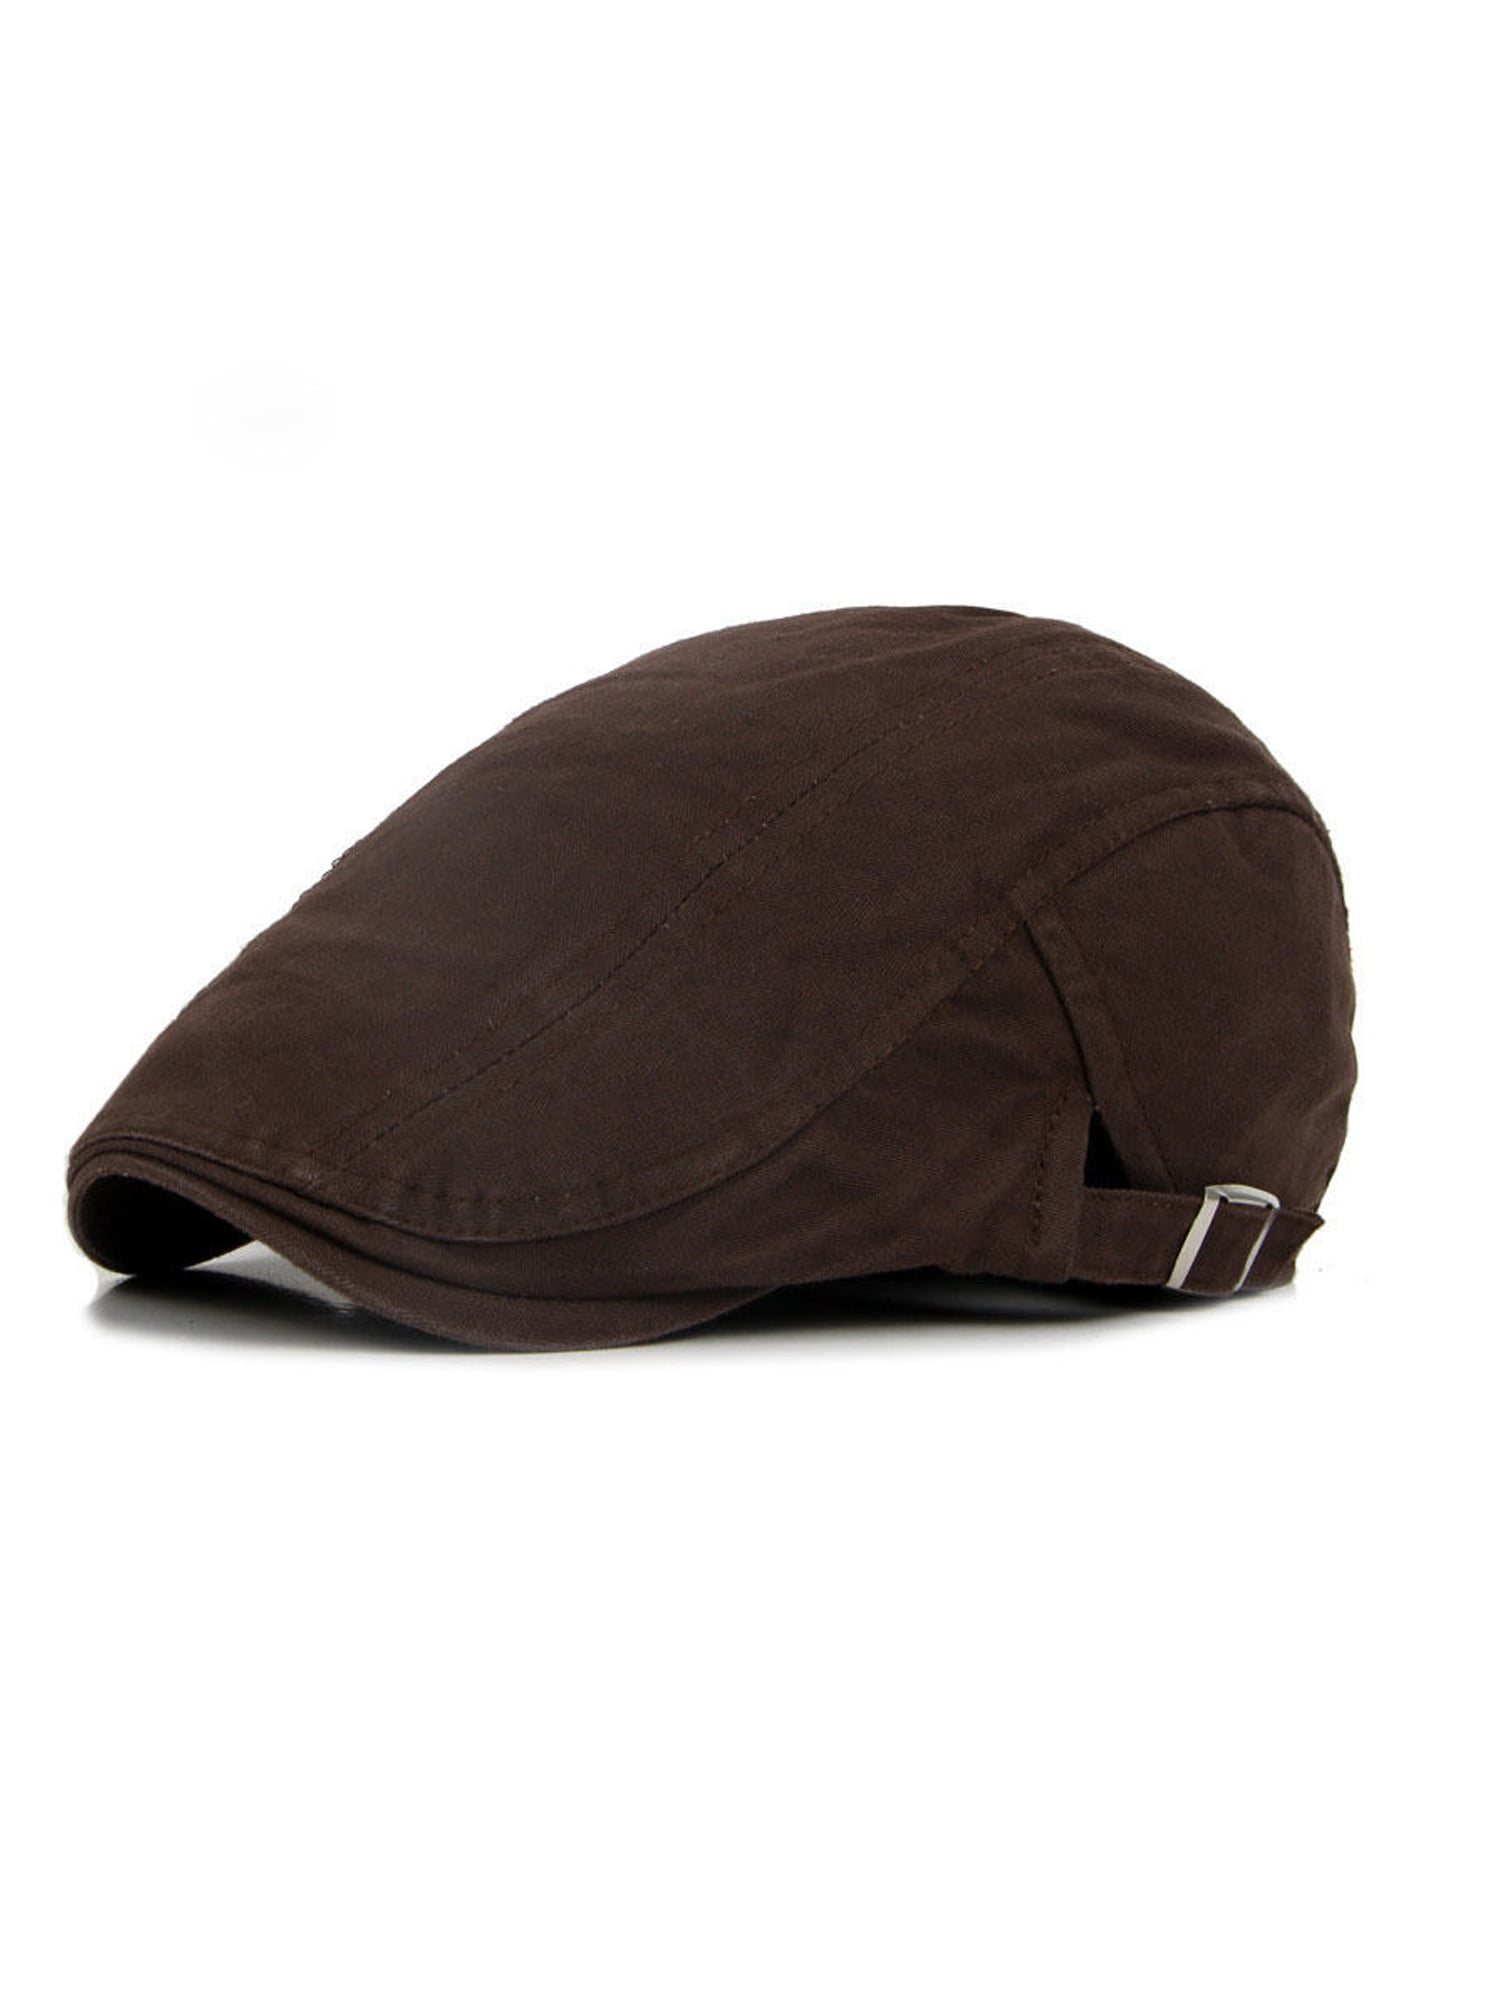 Comfy Outdoors Country Stylish Hat Fashion Modern Peaked Cap Cabbie Flax Beret